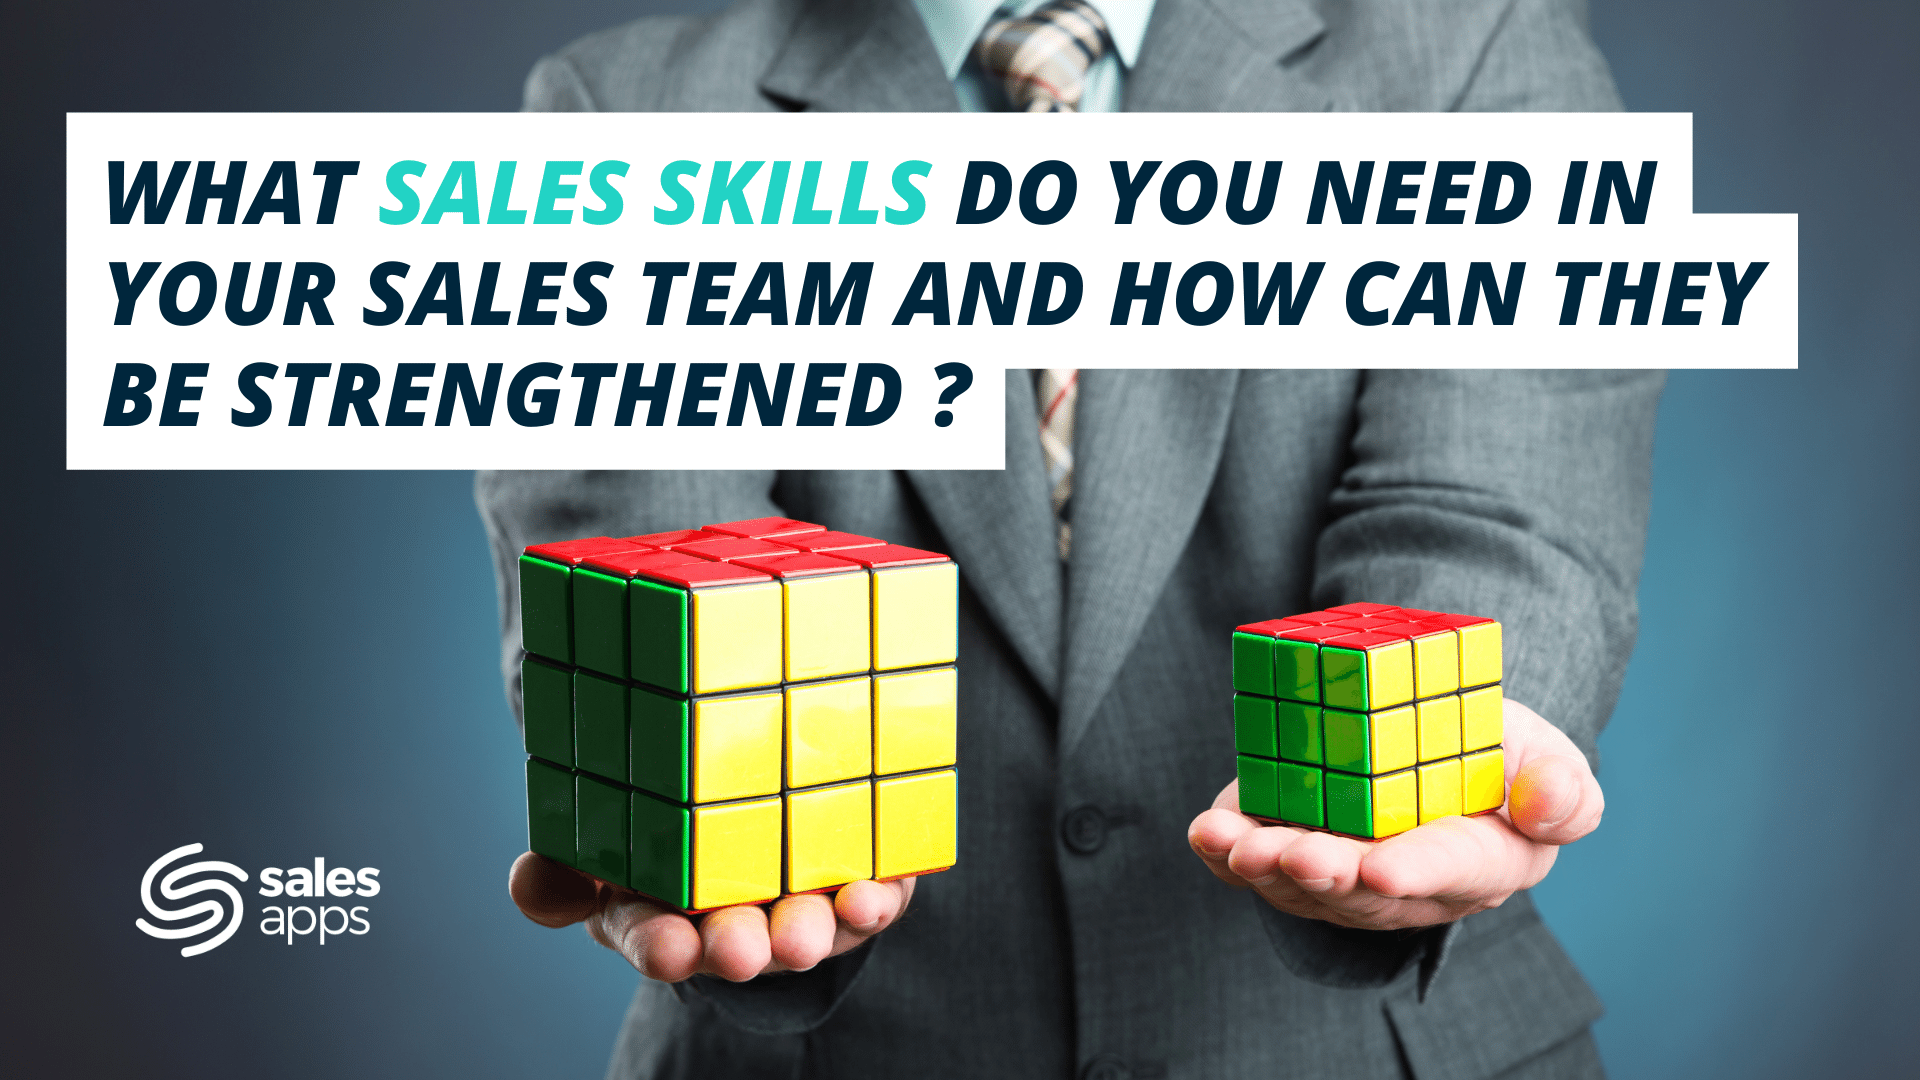 What sales skills should your sales team have? How can they be strengthened?